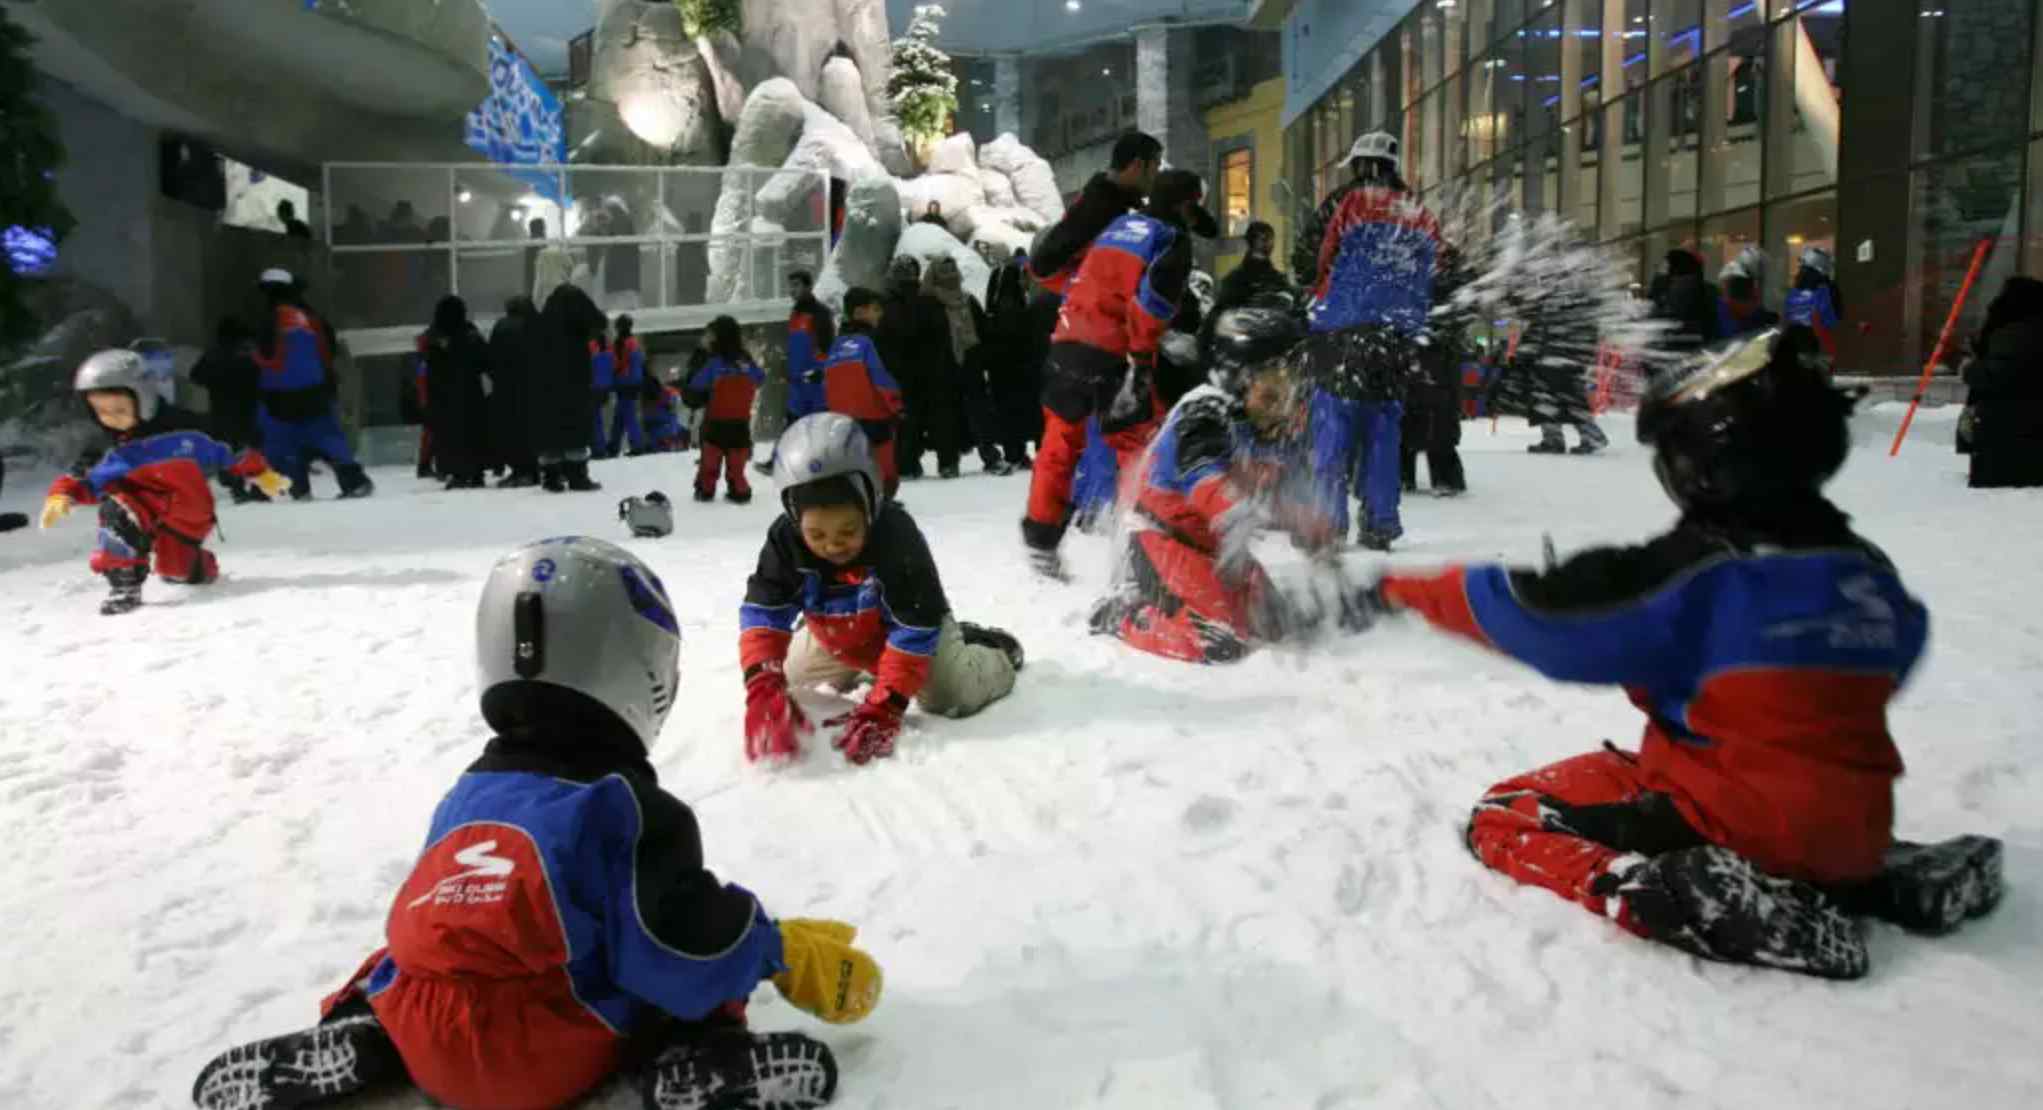 The Snow Classic Pass provides full-day access to the snow park, offering unlimited activities such as the zorb ball, tubing run, climbing wall, and bobsled runs.